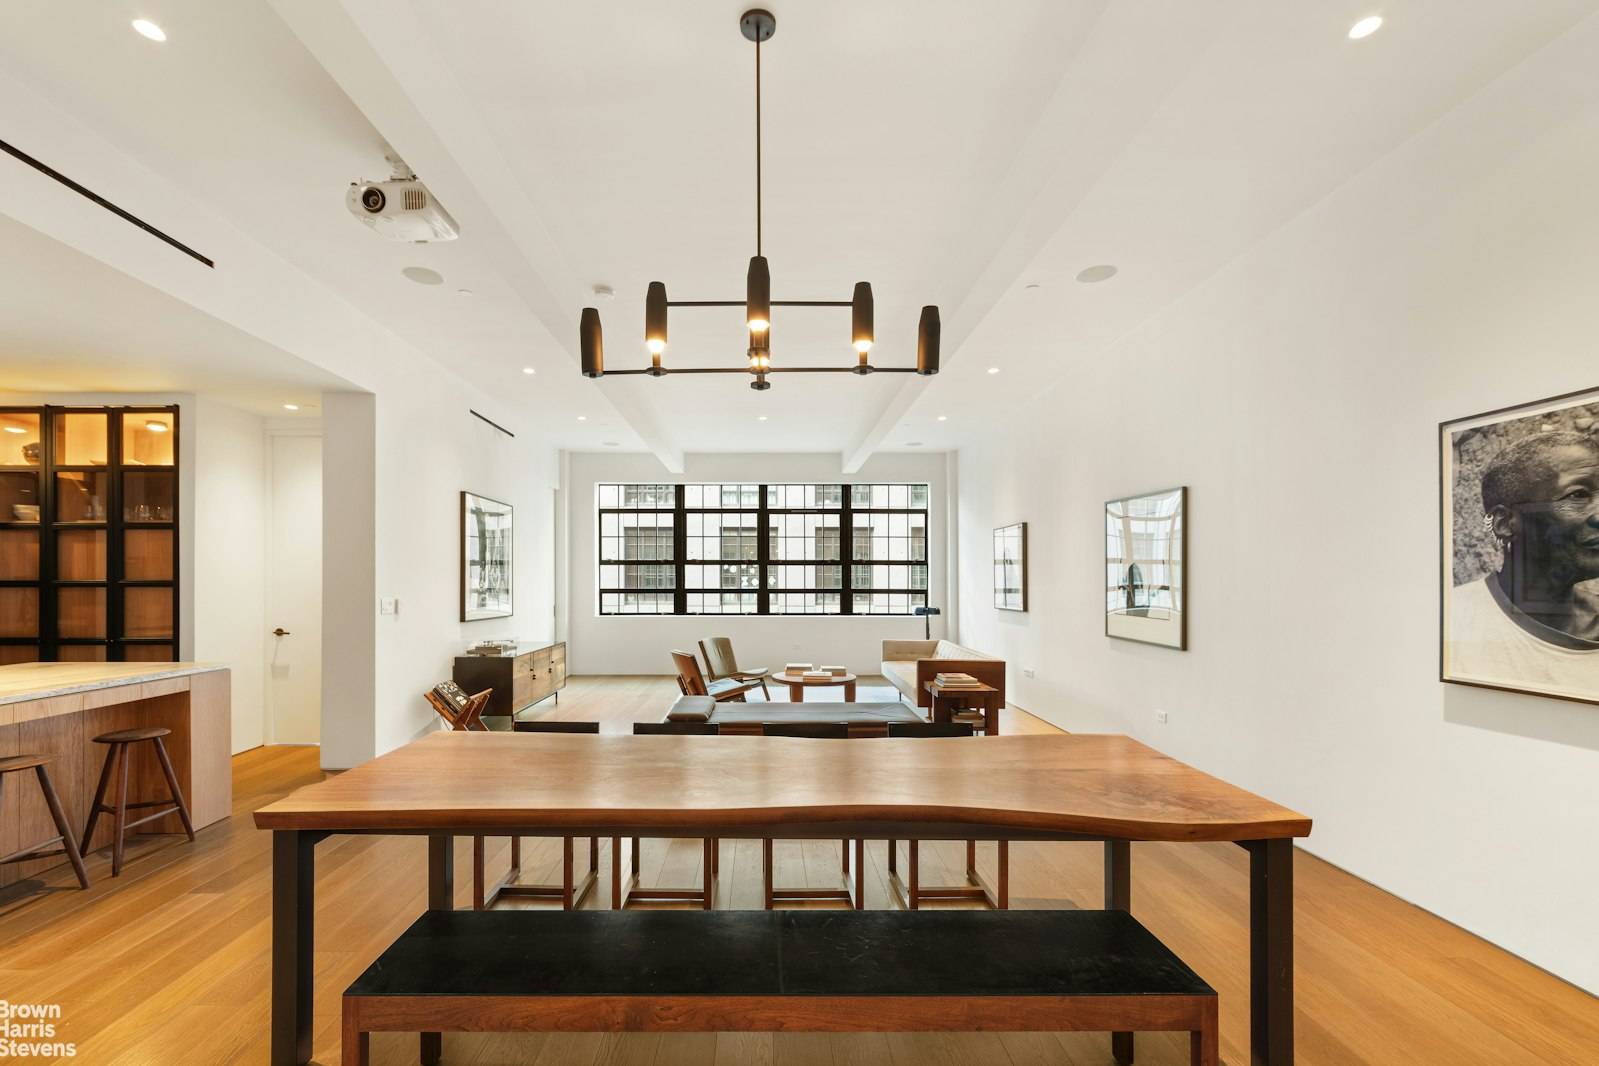 This museum quality 2, 600SF condominium loft is located in a former Brillo factory right in the heart of Dumbo's Historic District and features clean modern lines, a sprawling 3 ...